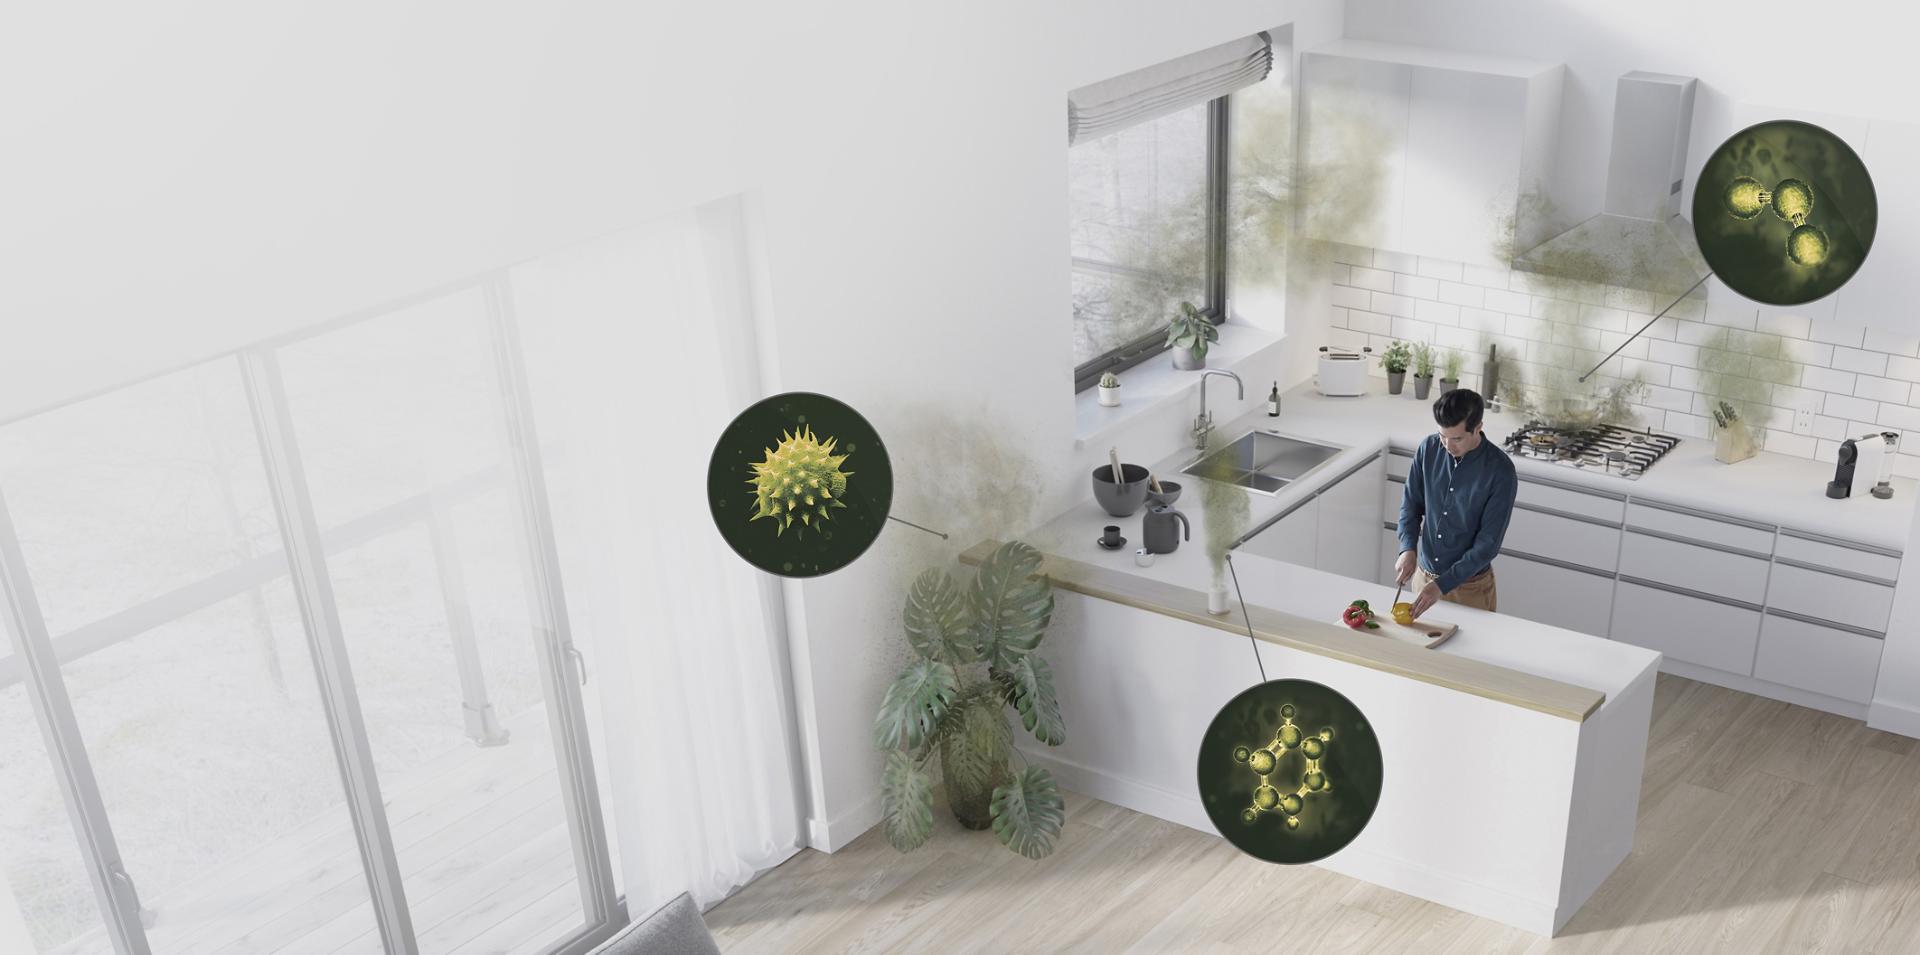 Pollutant sources in a living space and kitchen